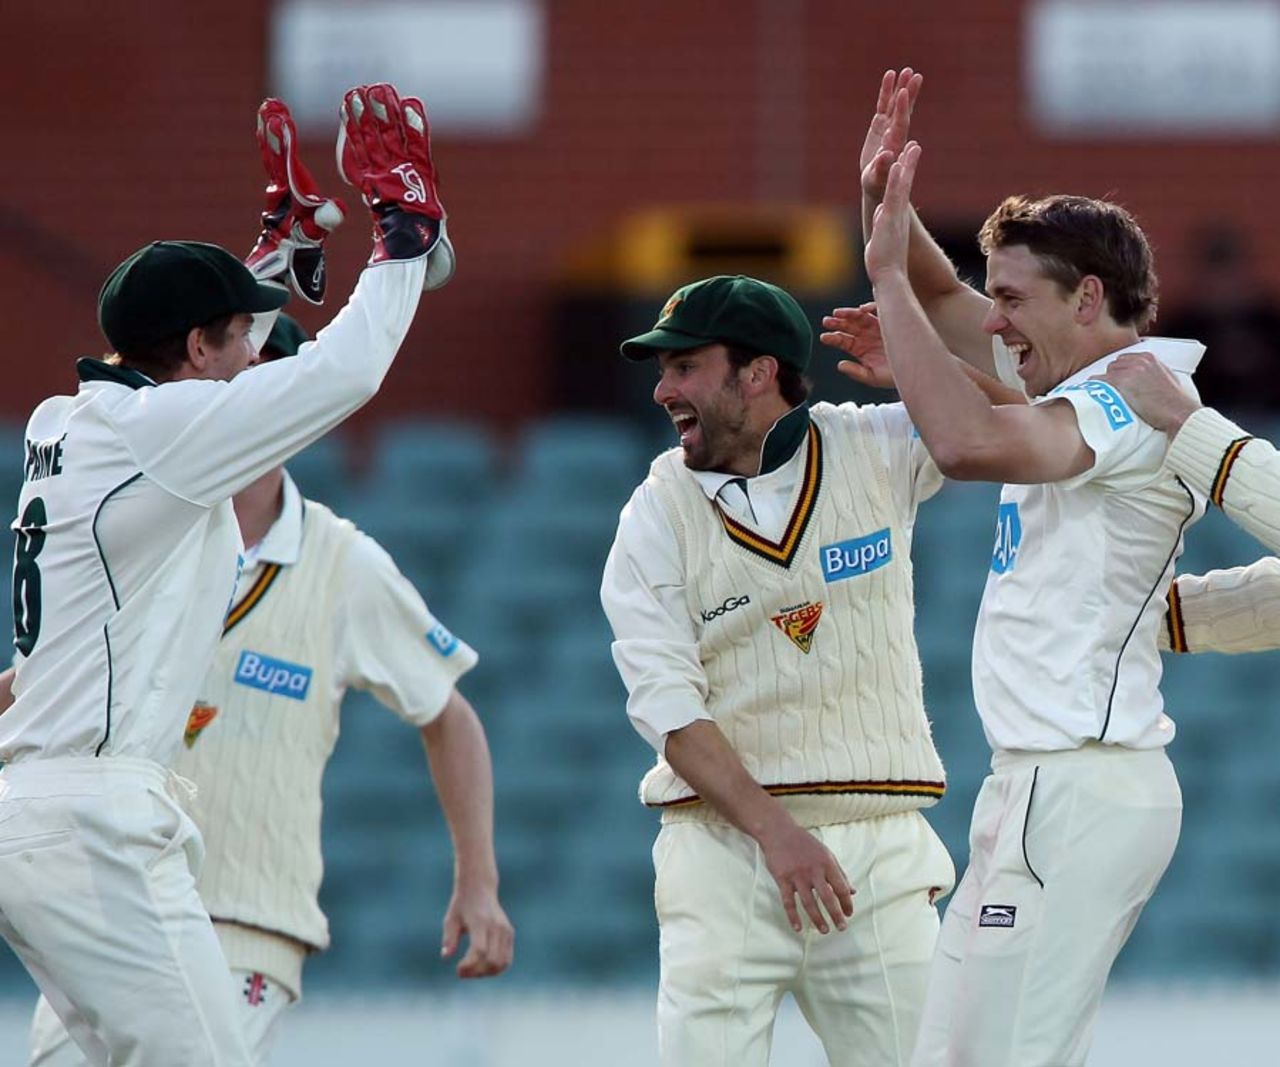 Luke Butterworth's eight wickets in the match with one day to go helped Tasmania to a dominant position against South Australia, South Australia v Tasmania, Sheffield Shield, Adelaide, 3rd day, October 11, 2012